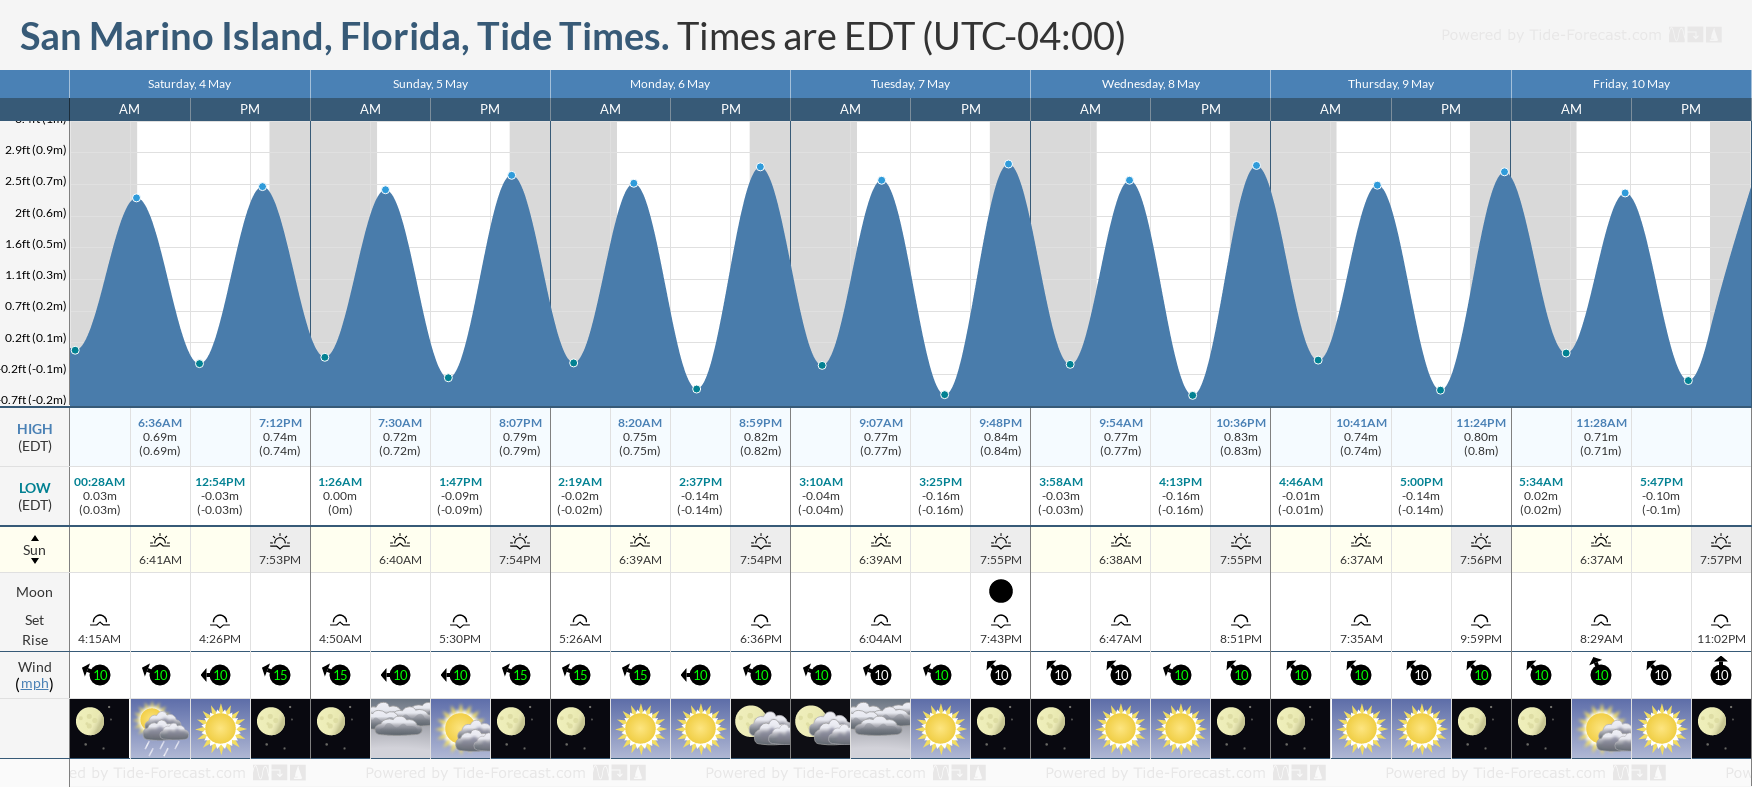 San Marino Island, Florida Tide Chart including high and low tide tide times for the next 7 days